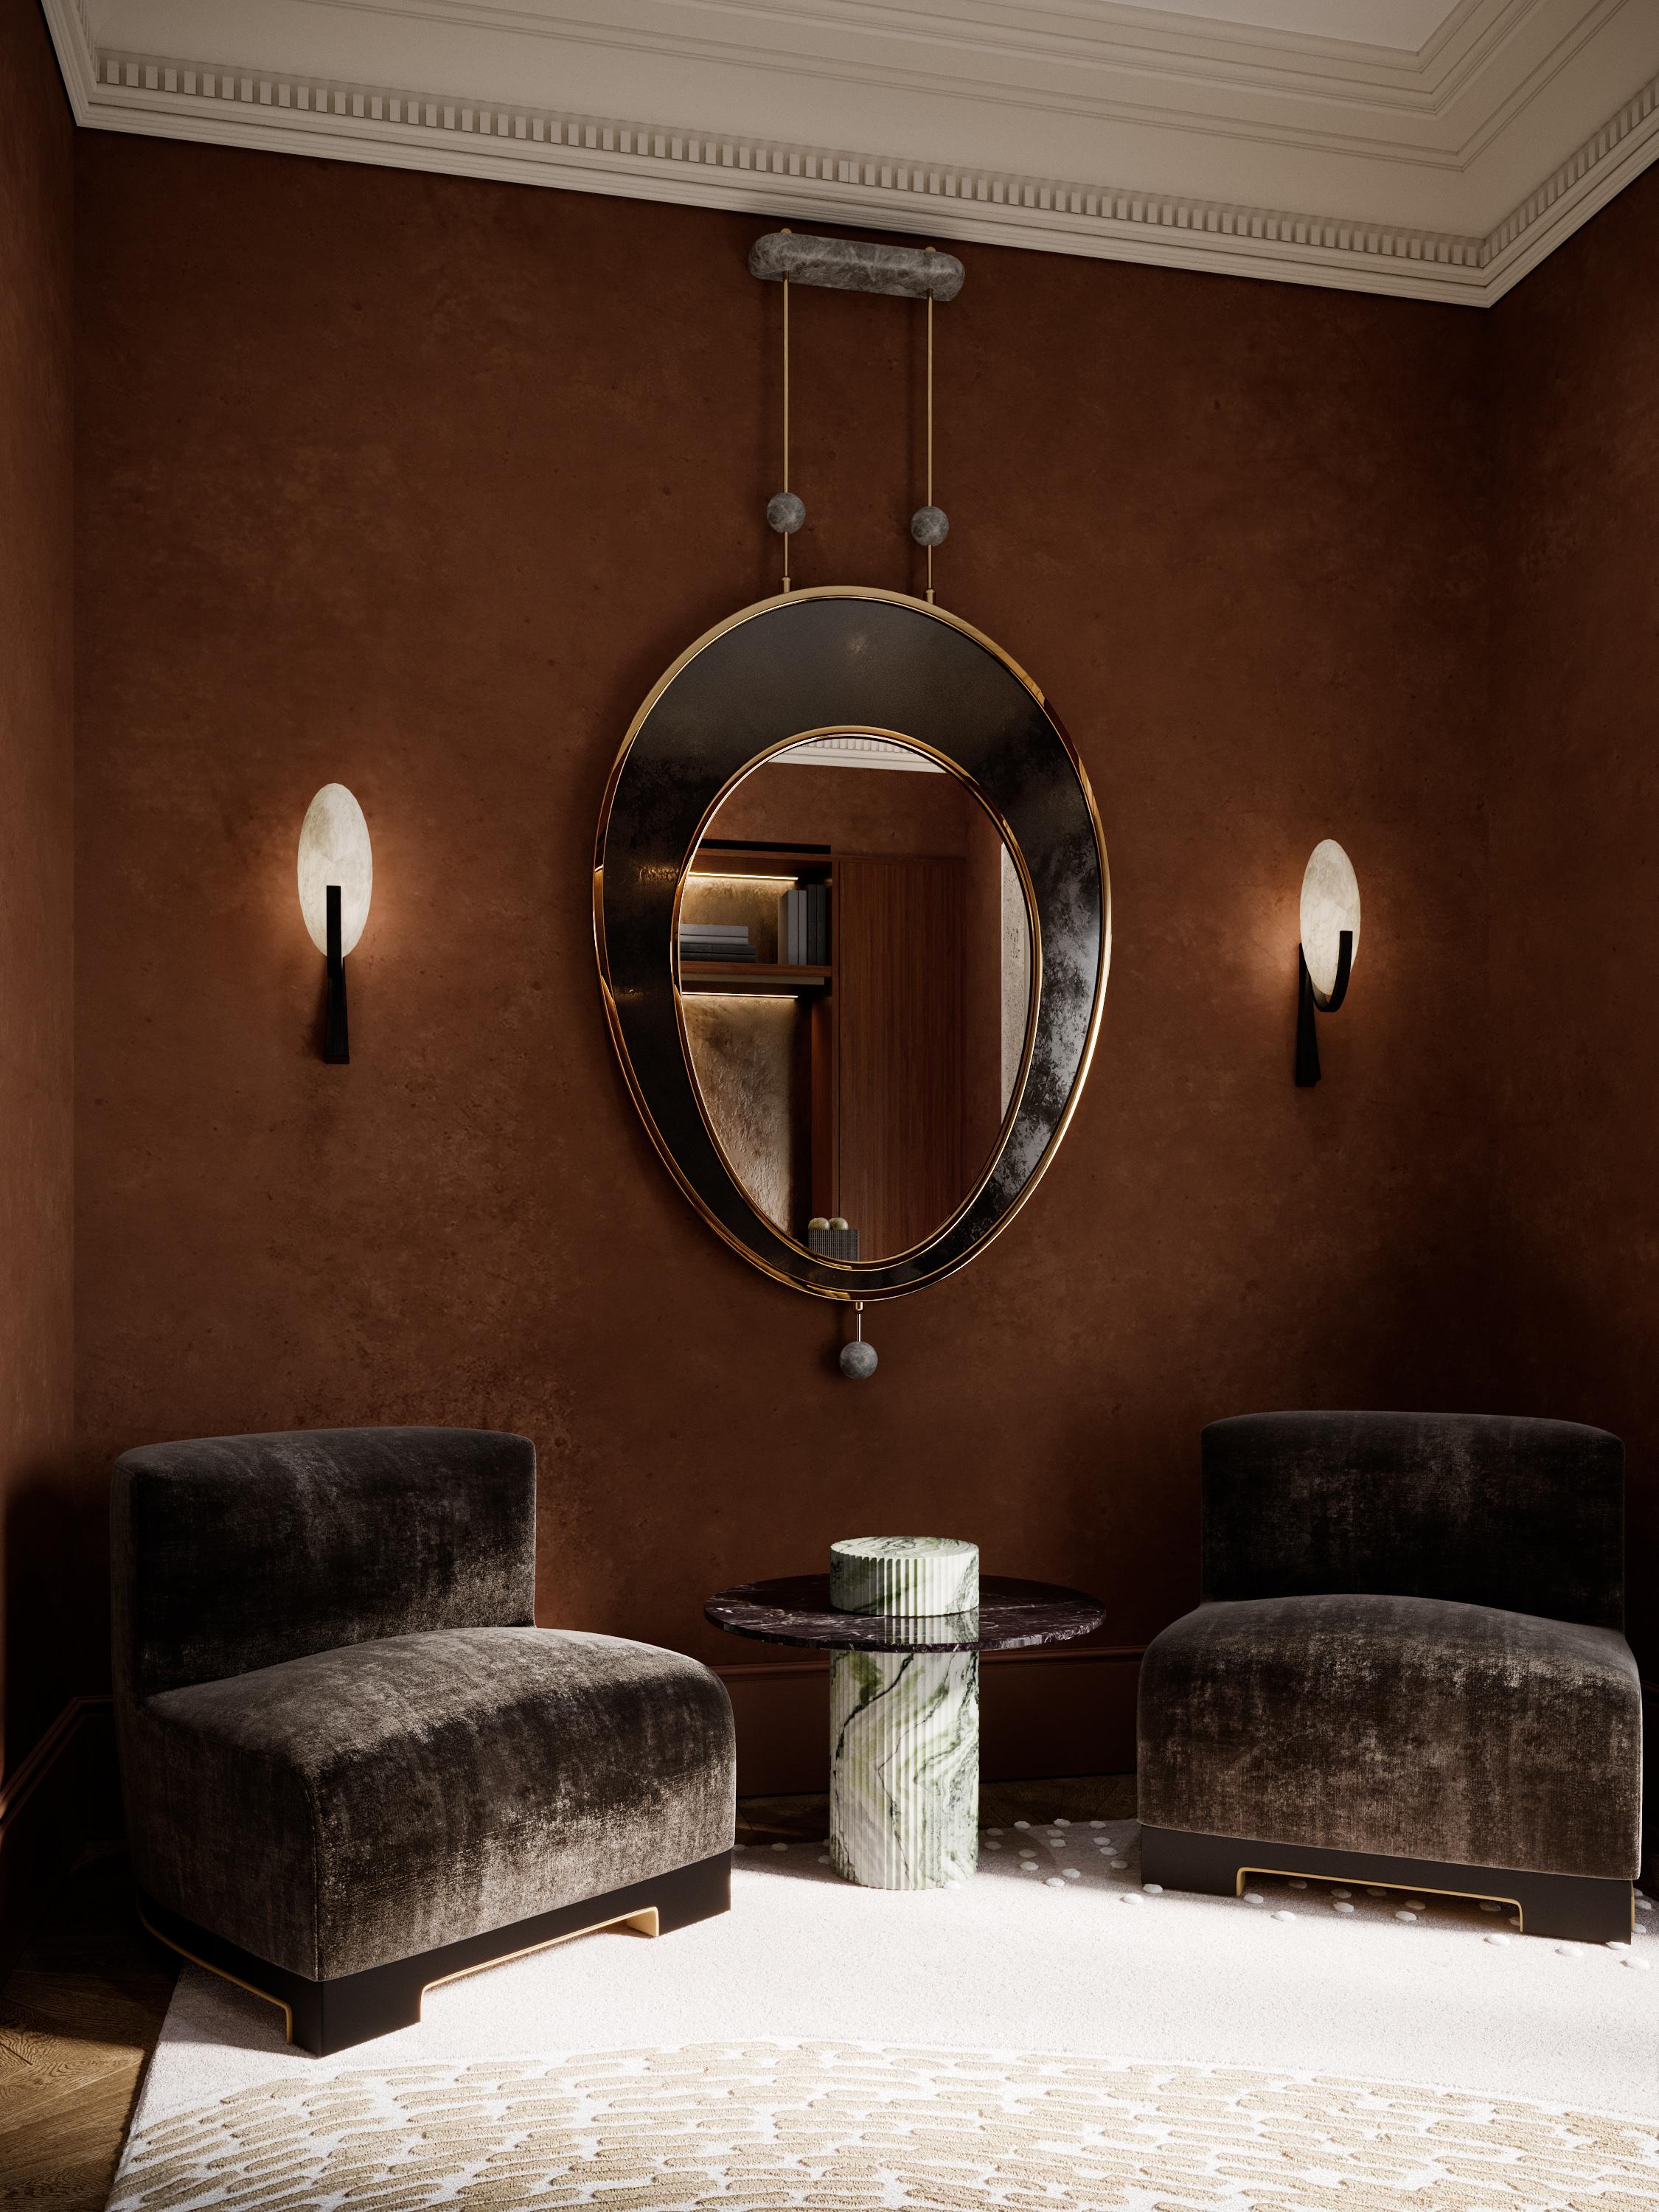 Refresh the beauty of your interior with a unique Cameo mirror! Create an aura of romance in any room – from bedrooms to hallways. The contemporary mirror is inspired by historical relics, like elegant pieces found within vintage jewellery boxes